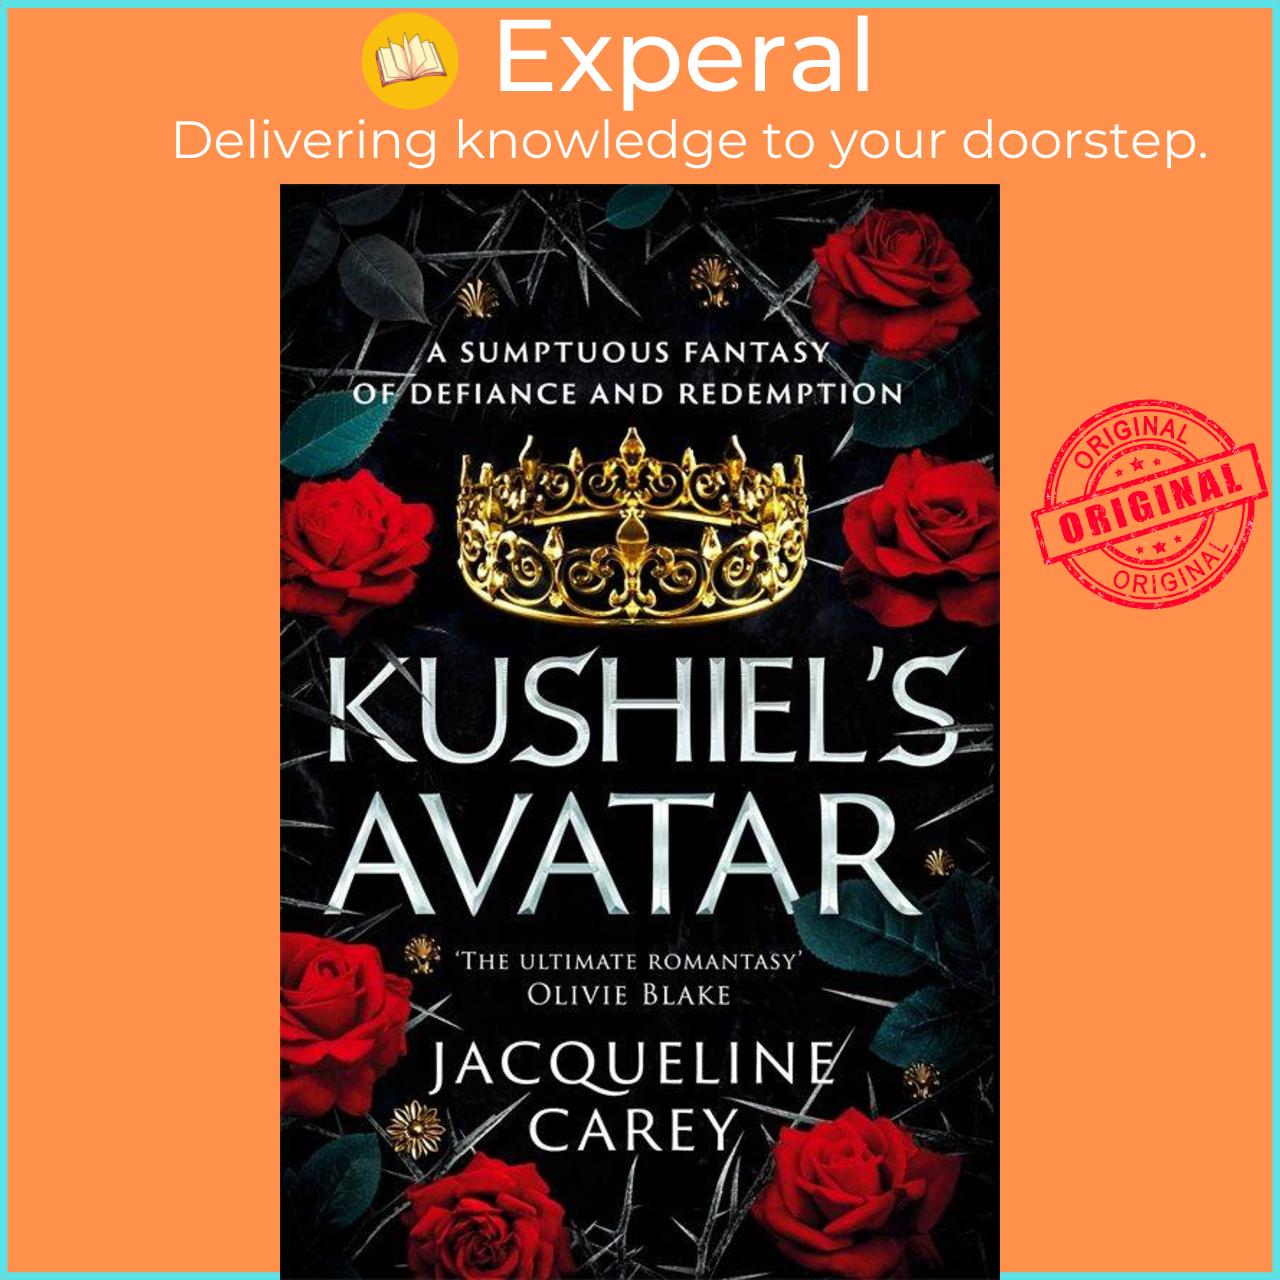 Sách - Kushiel's Avatar - a Fantasy Romance Full of Passion and Adventure by Jacqueline Carey (UK edition, paperback)